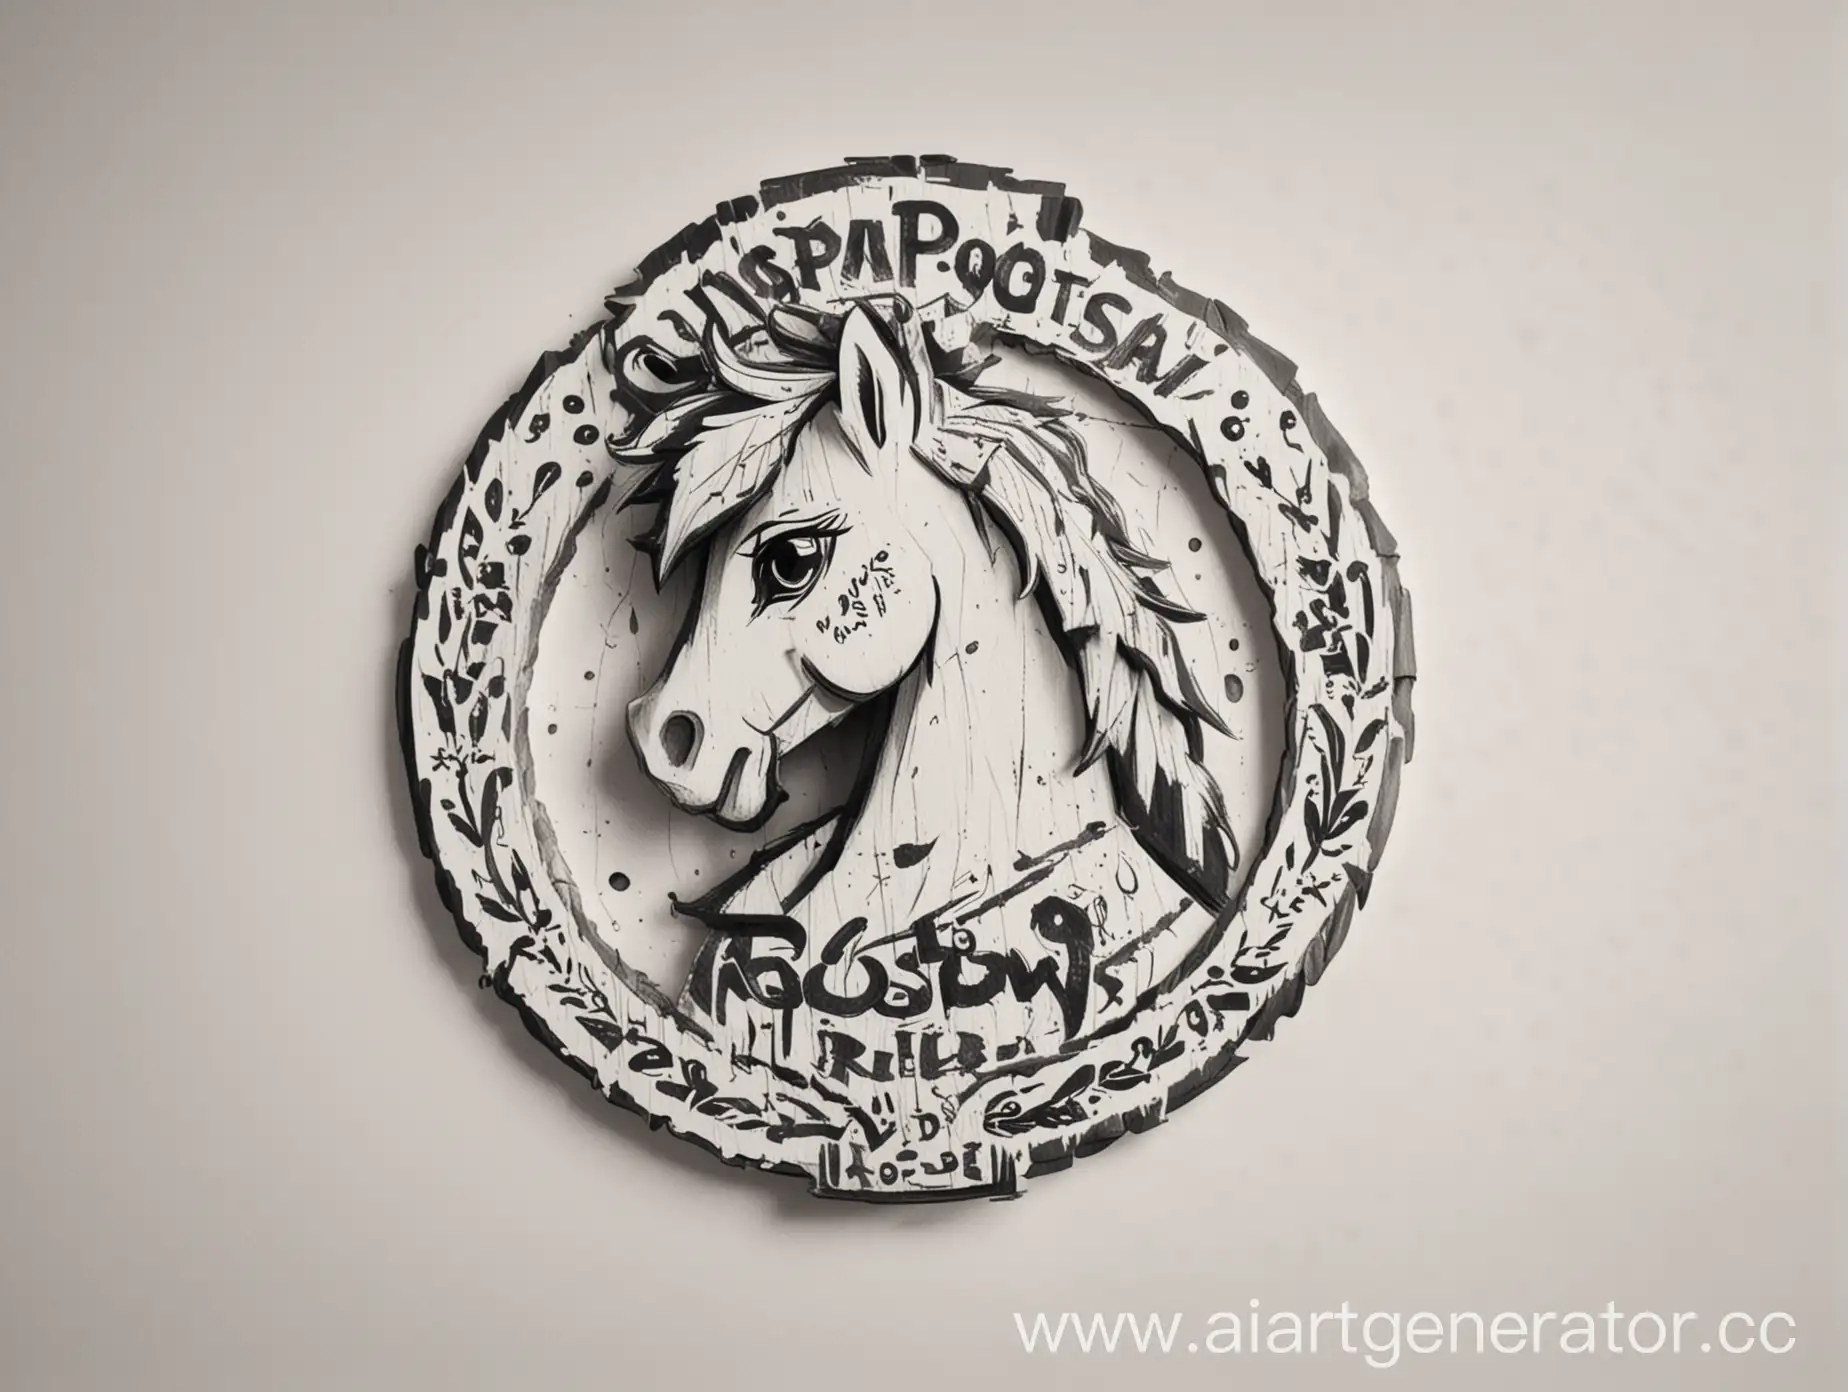 Craftsmans-Rendition-of-Rostov-Social-Artisan-Logo-with-My-Little-Pony-Character